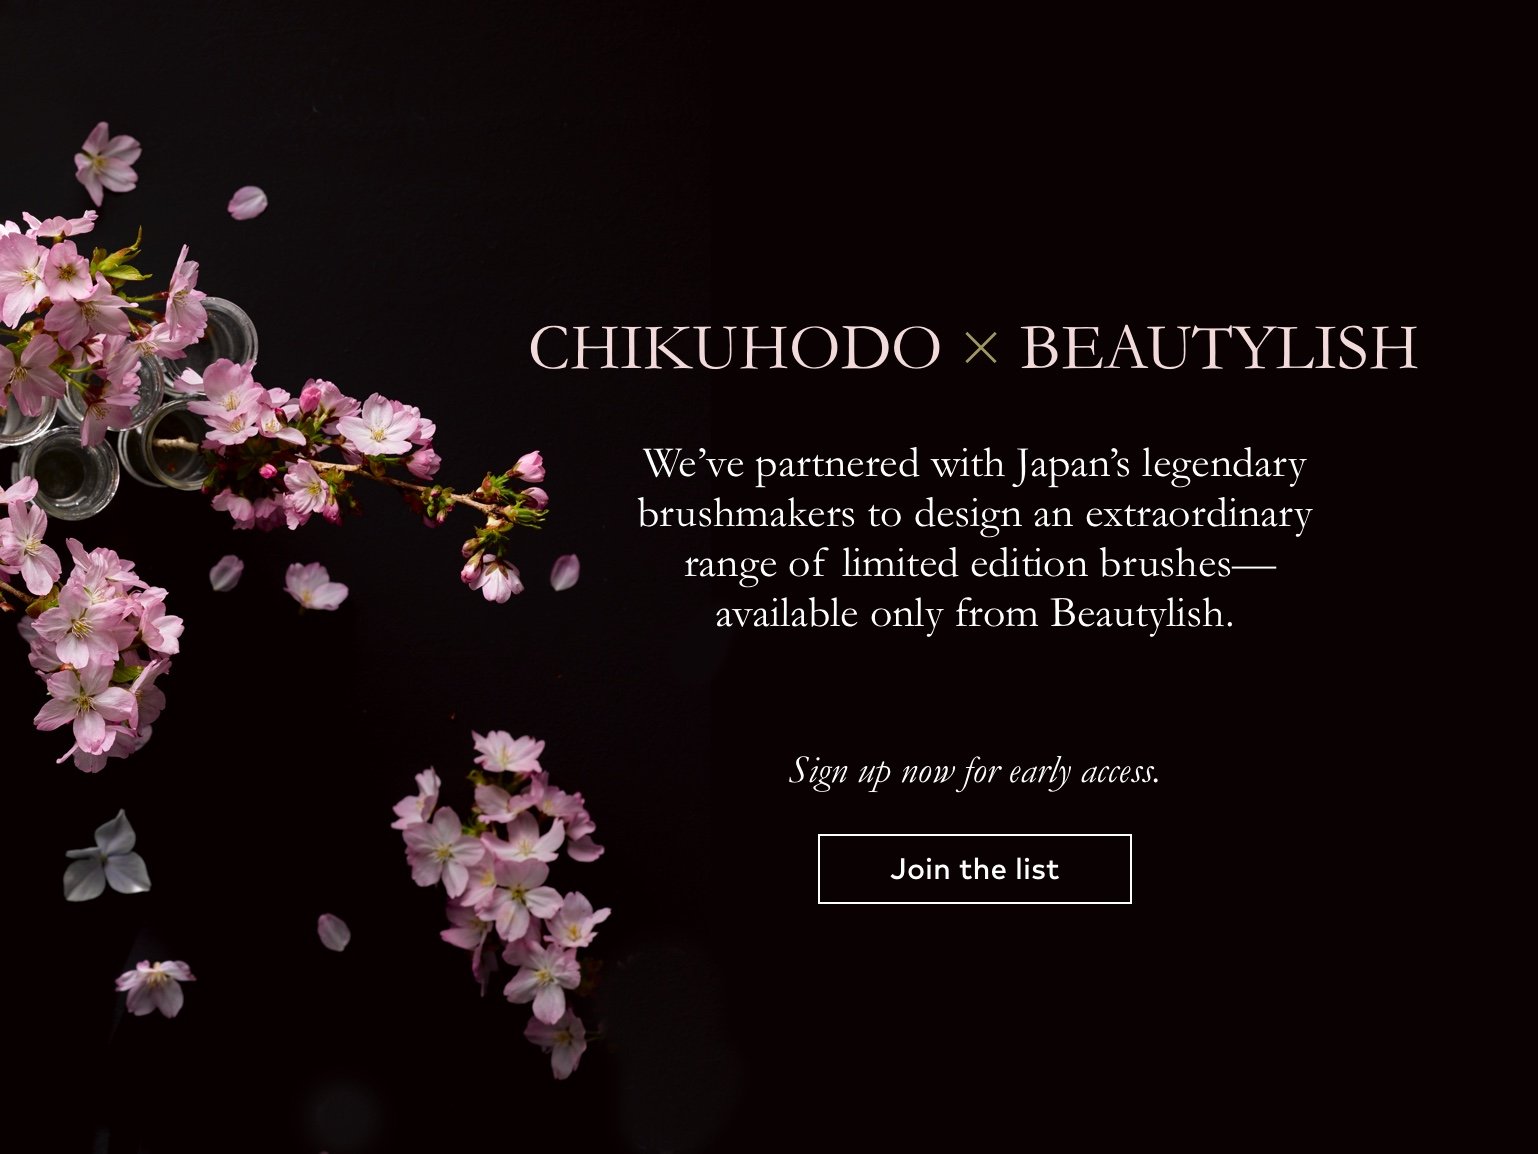 Sign up to get early access to The Sakura Collection